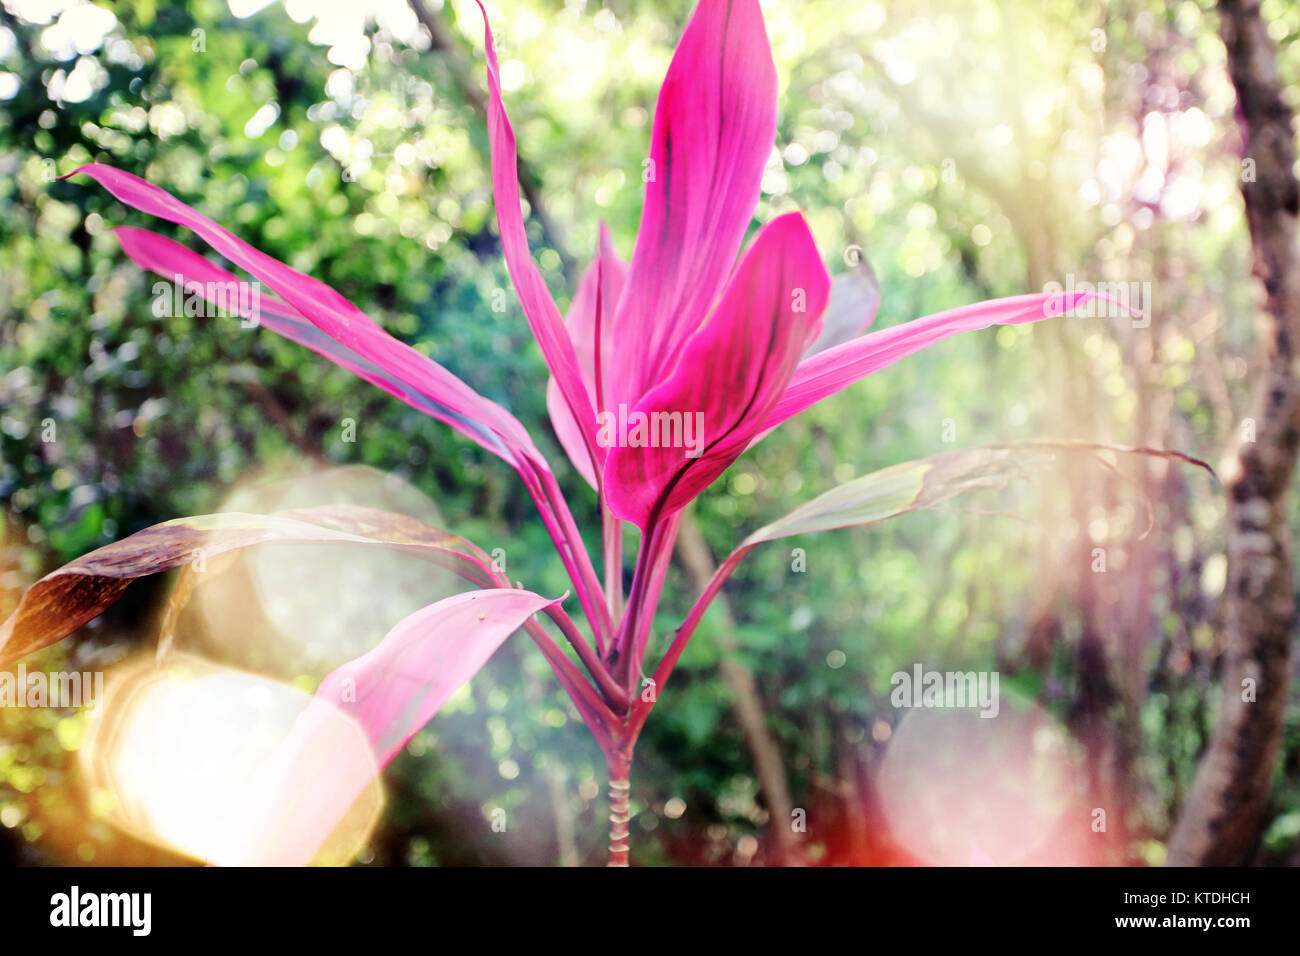 Beautiful pink blossom in tropical garden Stock Photo